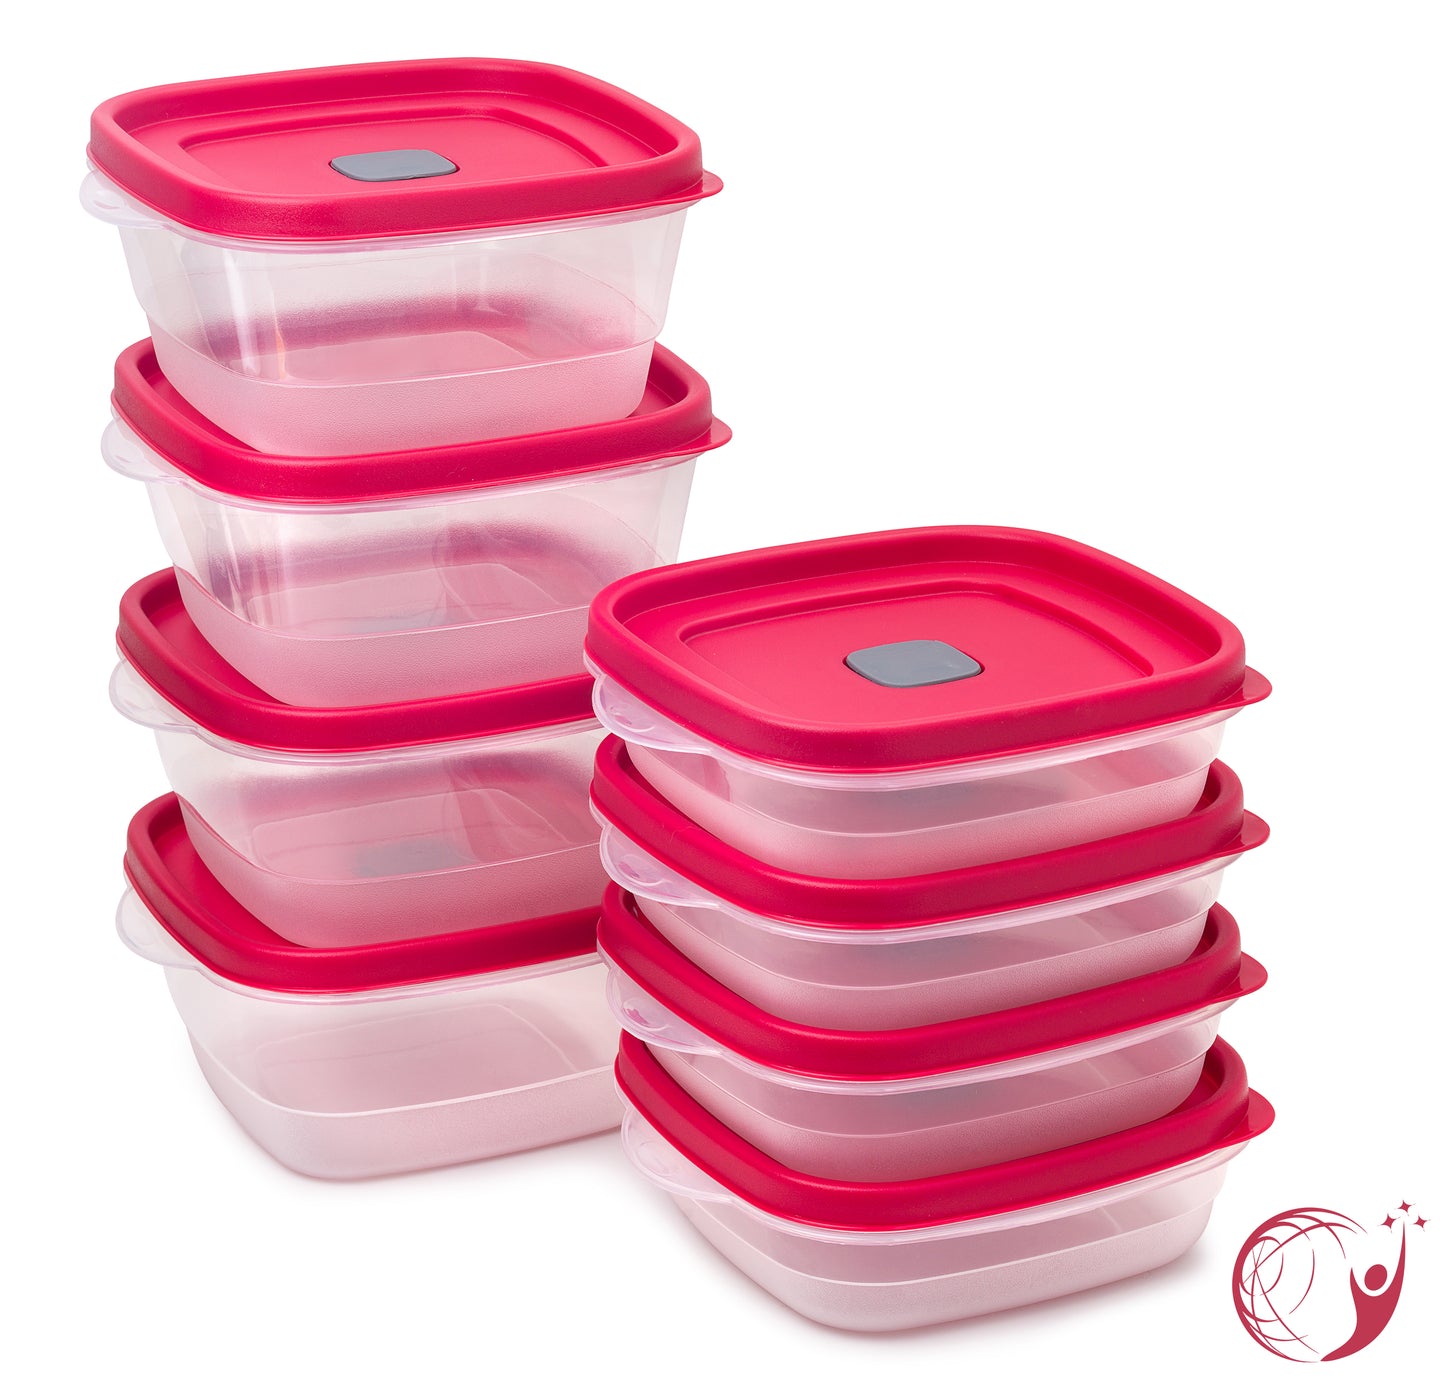 Rubbermaid 16-Piece Food Storage Containers with Lids and Steam Vents,  Microwave and Dishwasher Safe, Red & Easy Find Lids 5-Cup Food Storage and